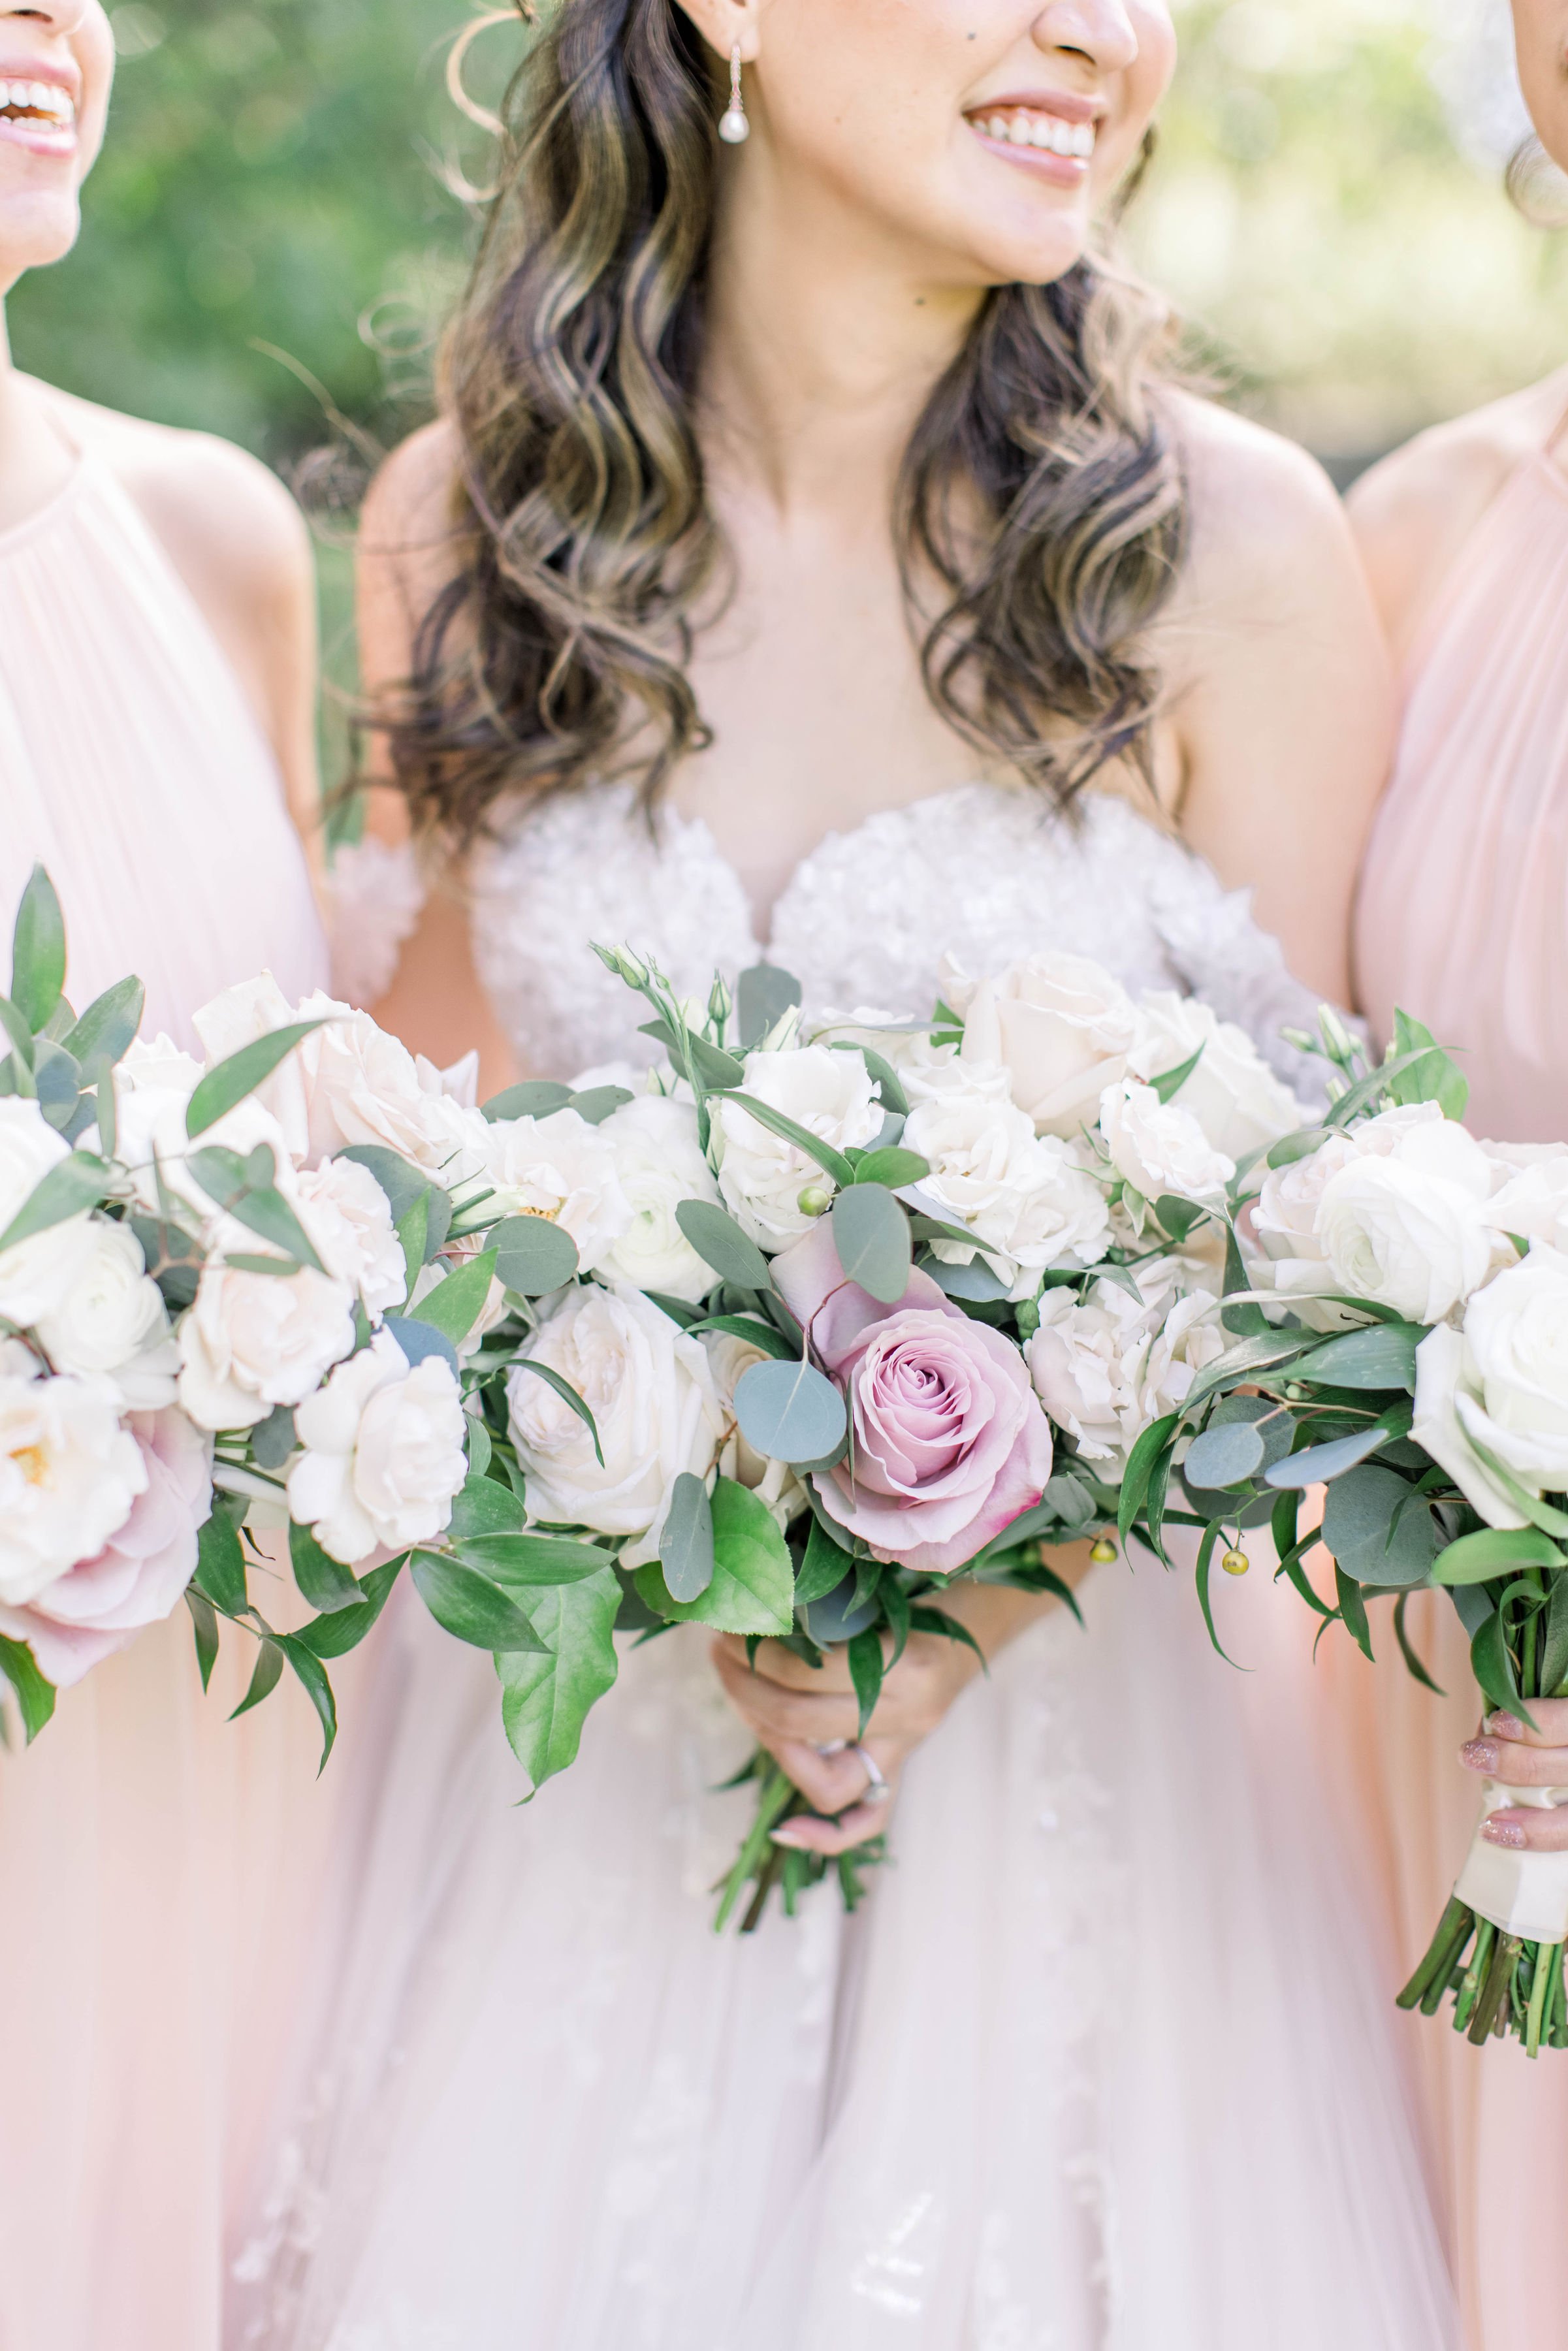  Detailed wedding portrait of a bridal bouquet of light pink roses by Chelsea Mason Photography. bridal bouquet light pink rose #ChelseaMasonPhotography #ChelseaMasonWeddings #DowntownOttawa #FairmontChateauLaurier #OttawaWeddings #OttawaPhotographer